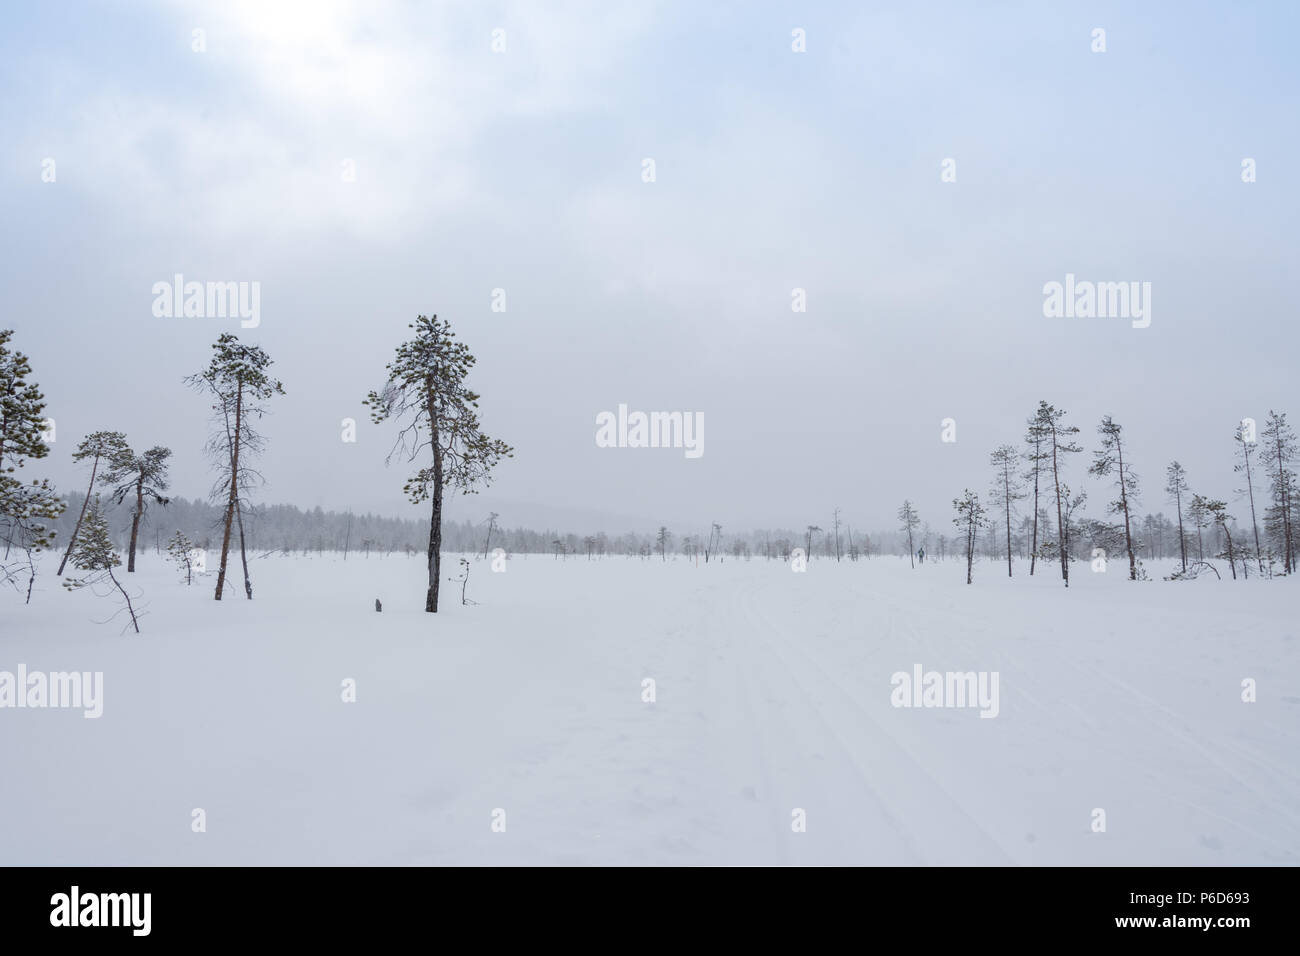 A skier in snowy landscape in Finland's Lapland Stock Photo